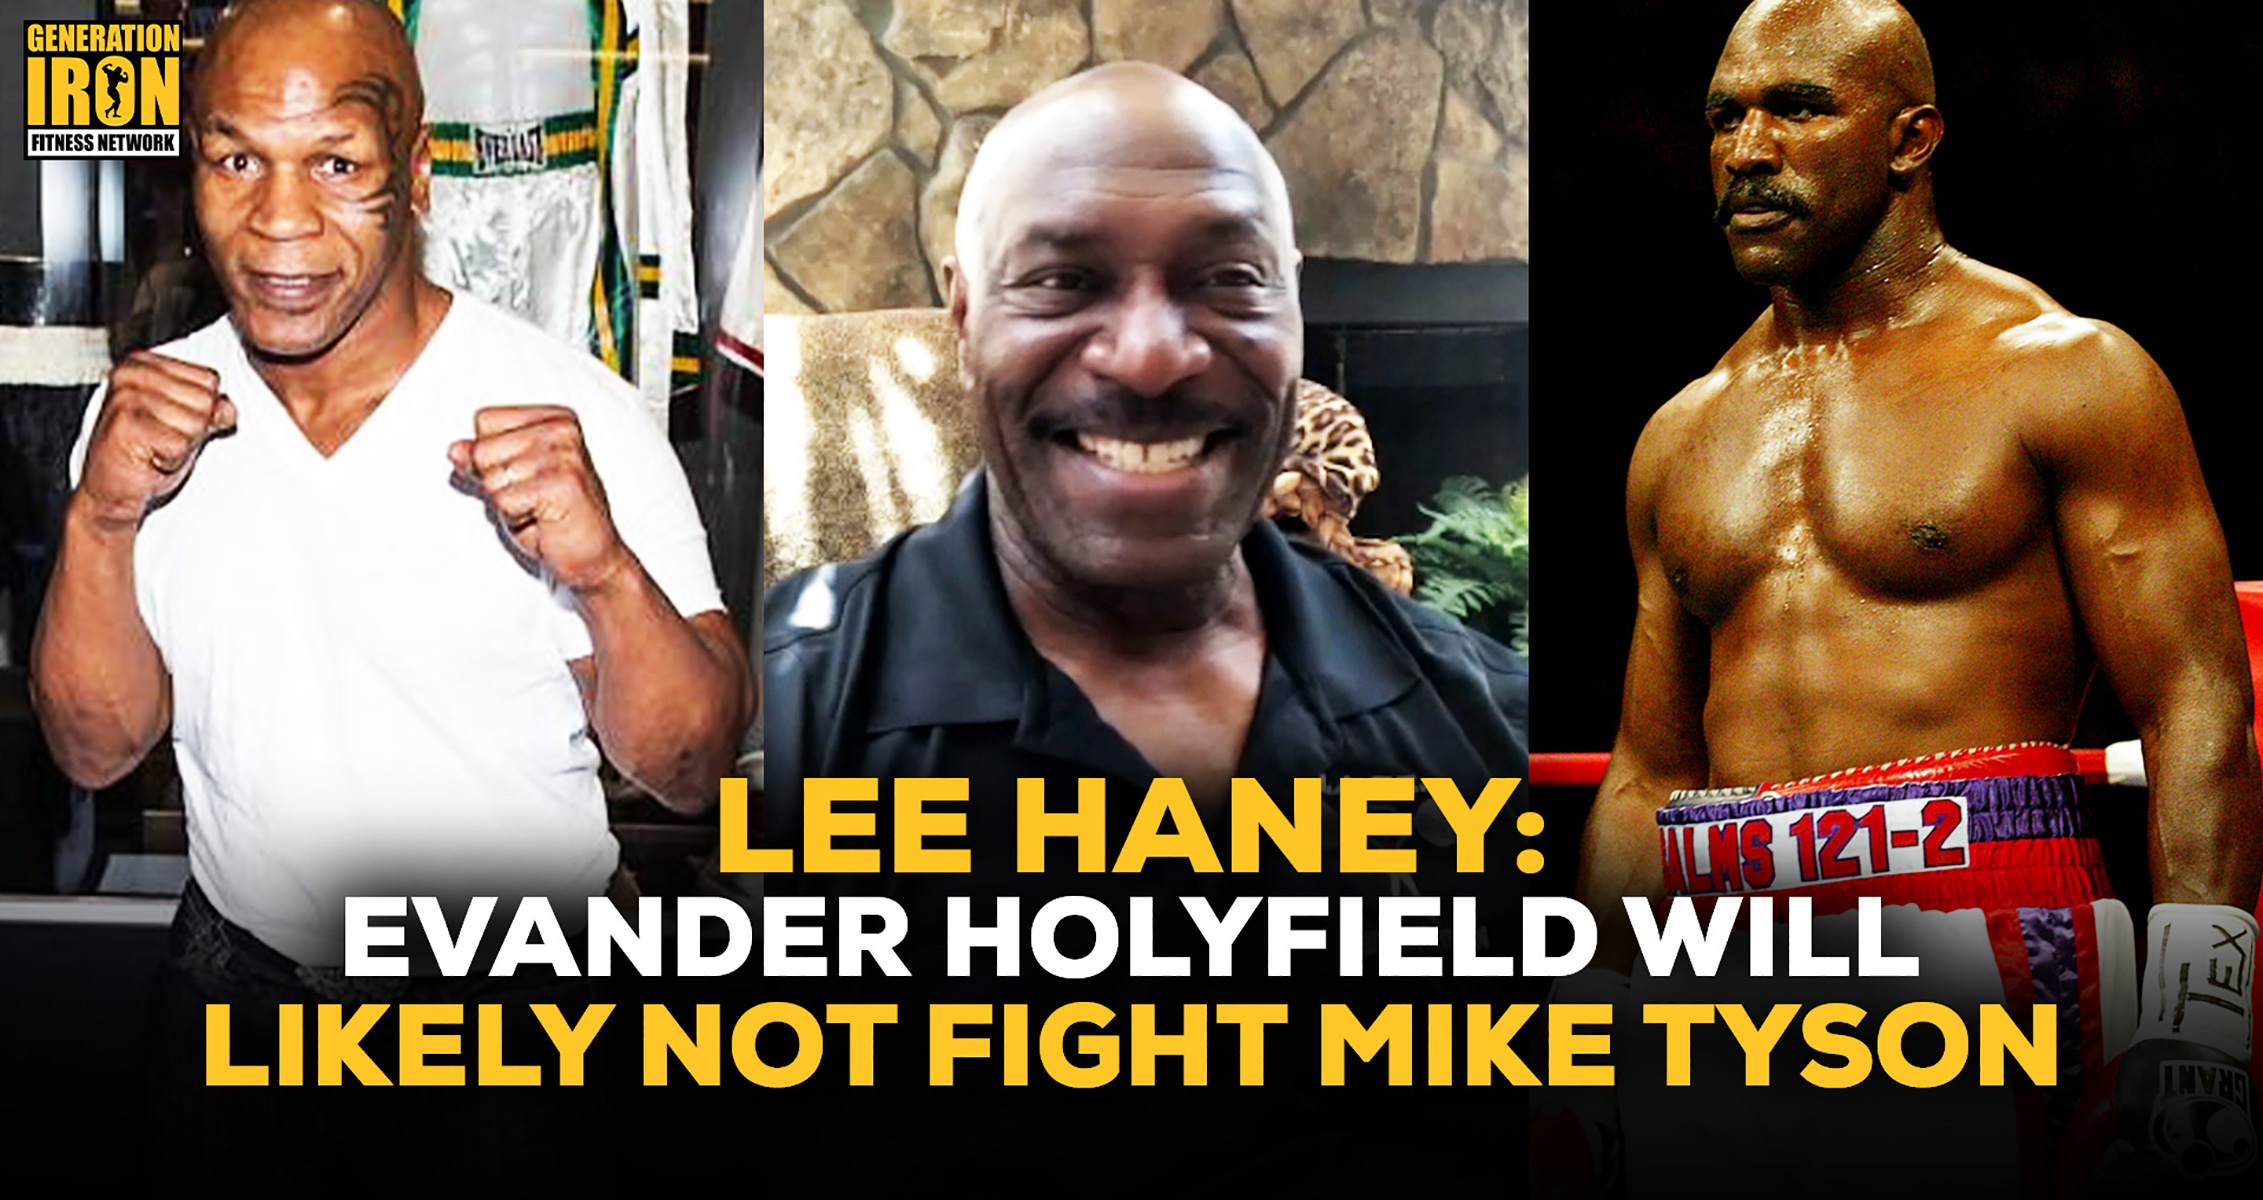 Lee Haney: Evander Holyfield Claims He Will Not Comeback To Fight Mike Tyson